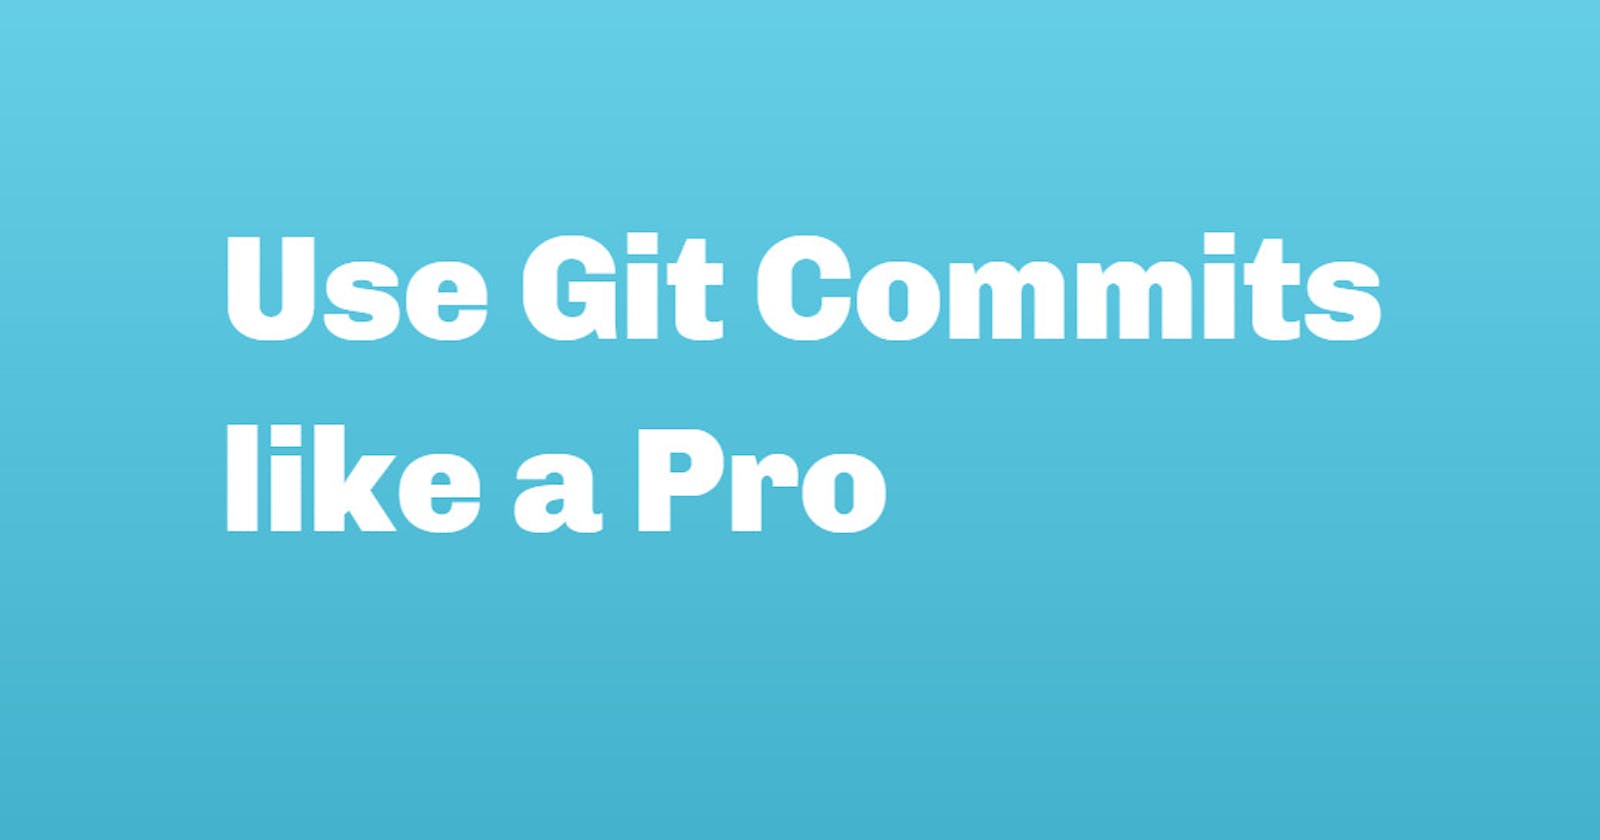 Semantic Git Commit messages which everyone should follow! 📝